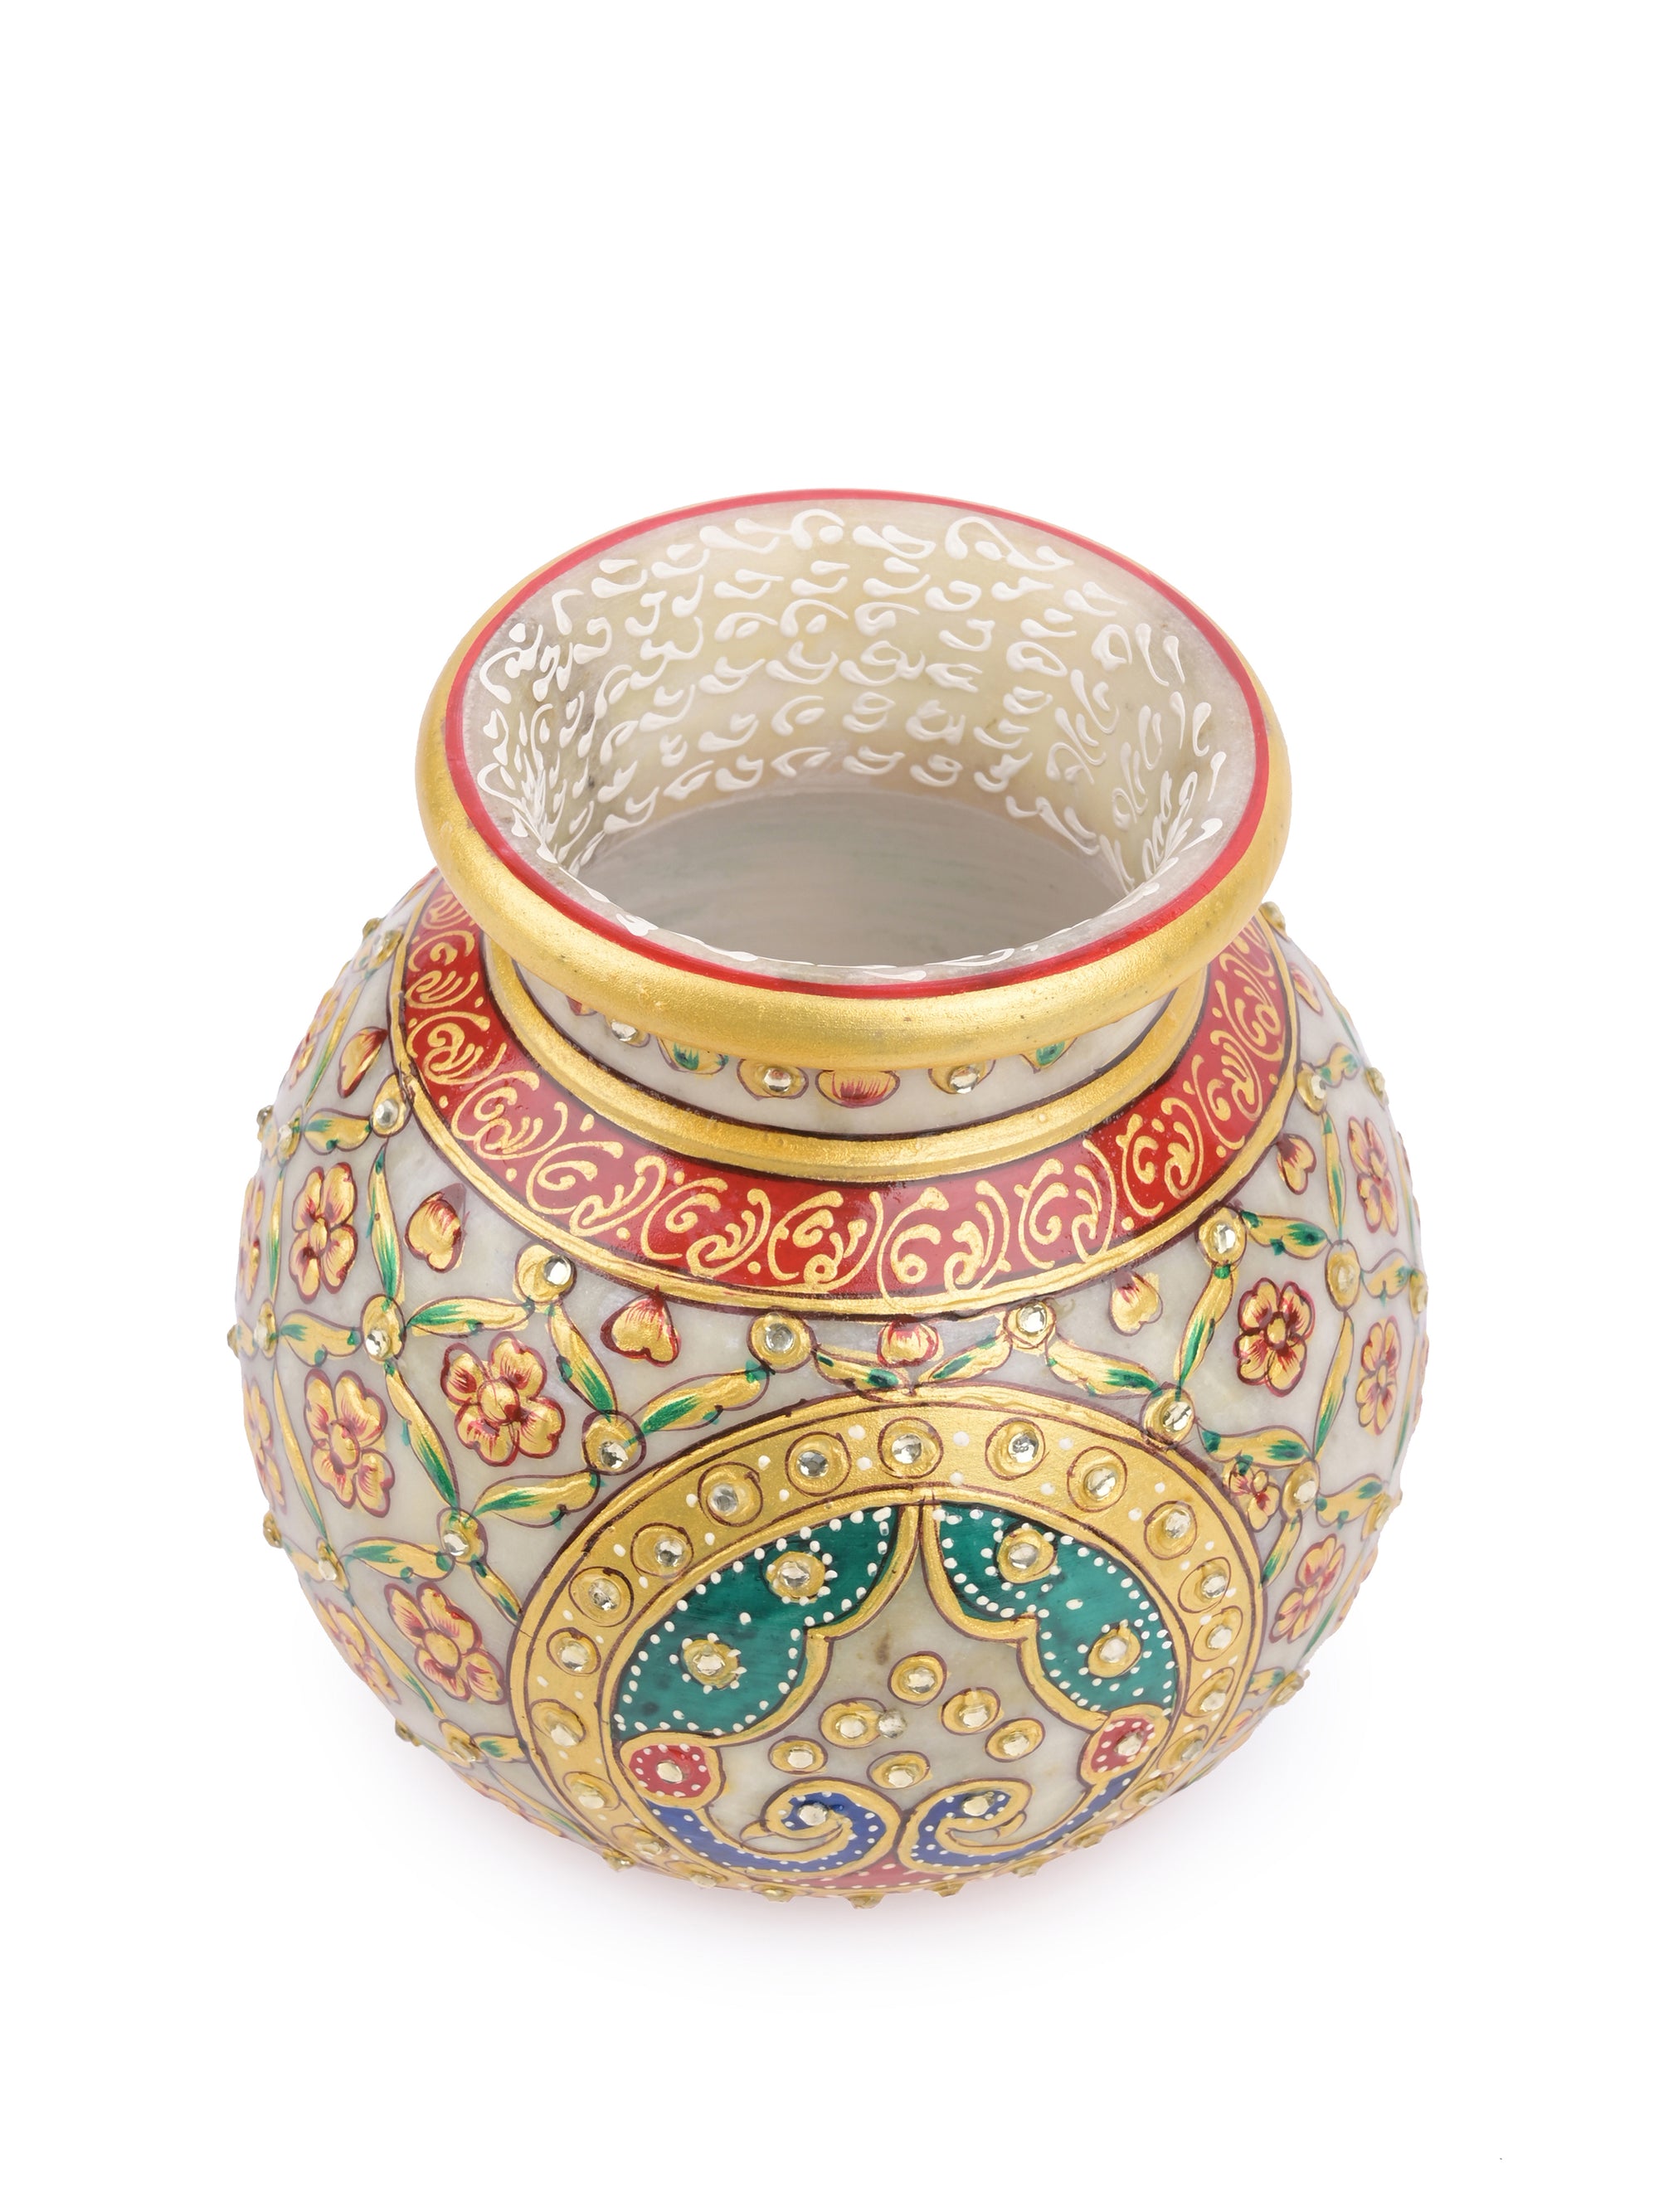 Traditional marble pitcher / kalash with meenakari flower painting - medium size - The Heritage Artifacts